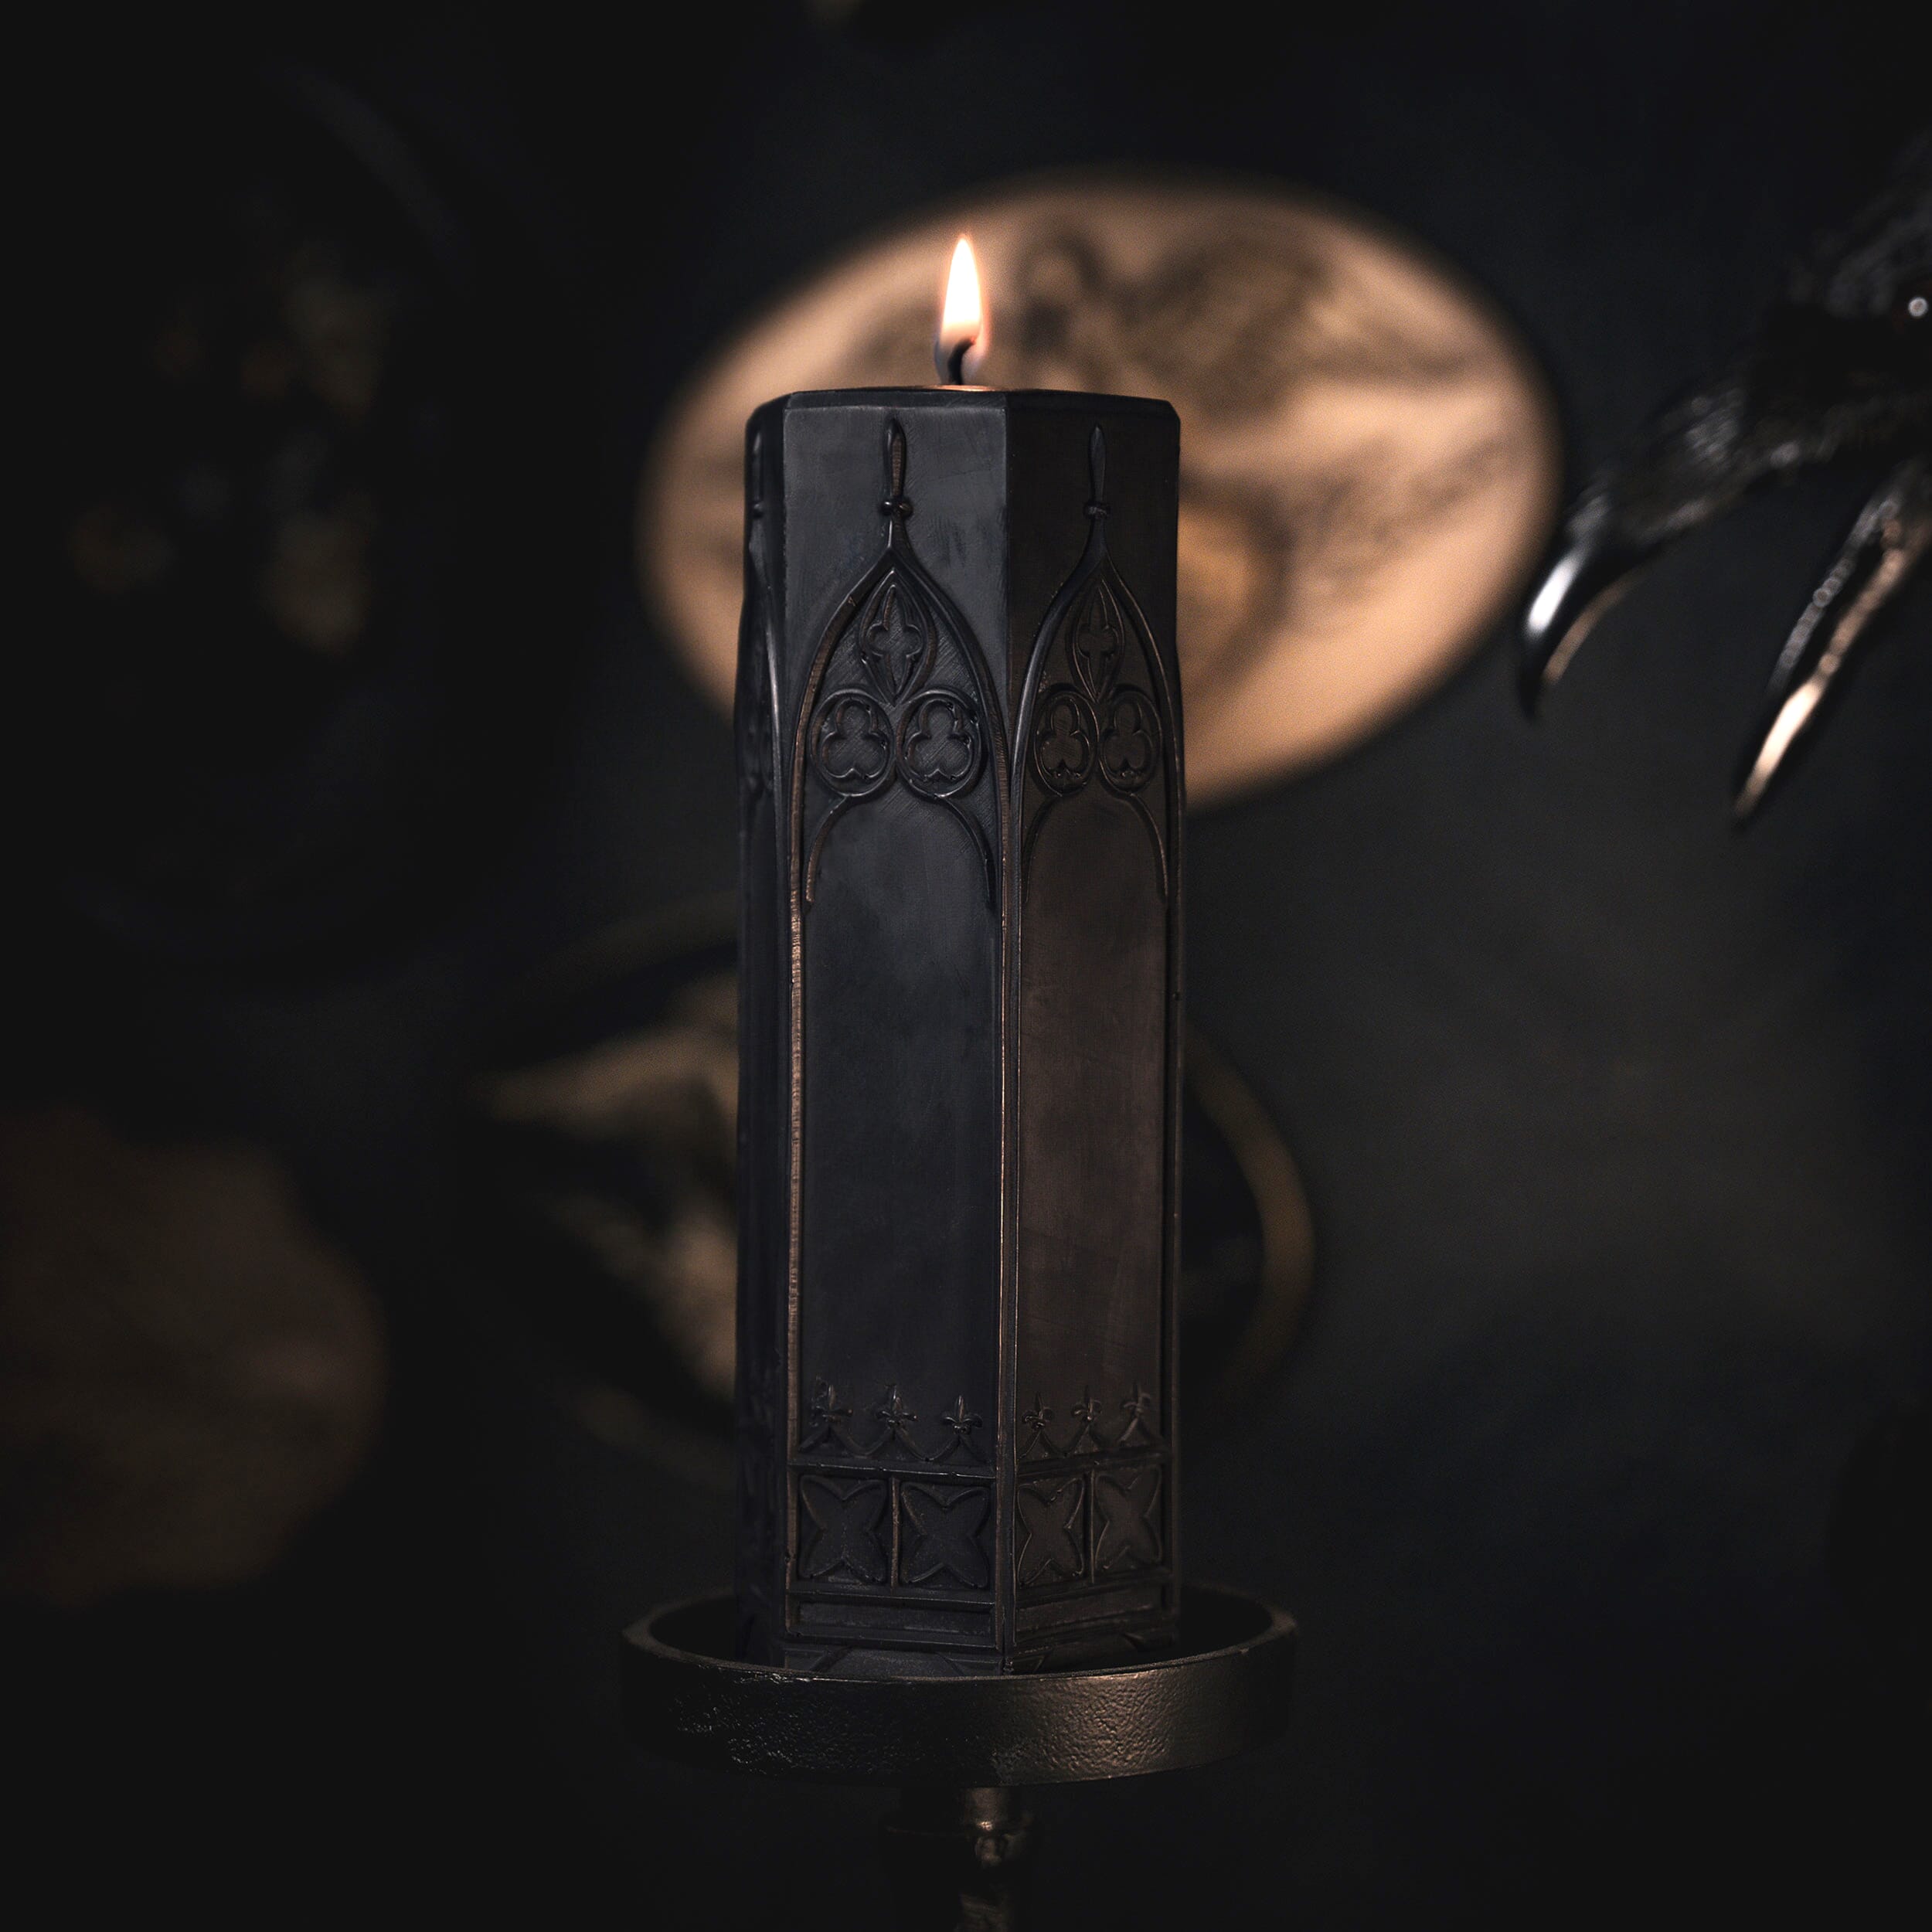 gothic cathedral pillar candle gothic candle the blackened teeth gothic homeware gothic home decorgothic cathedral pillar candle gothic candle the blackened teeth gothic homeware gothic home decor